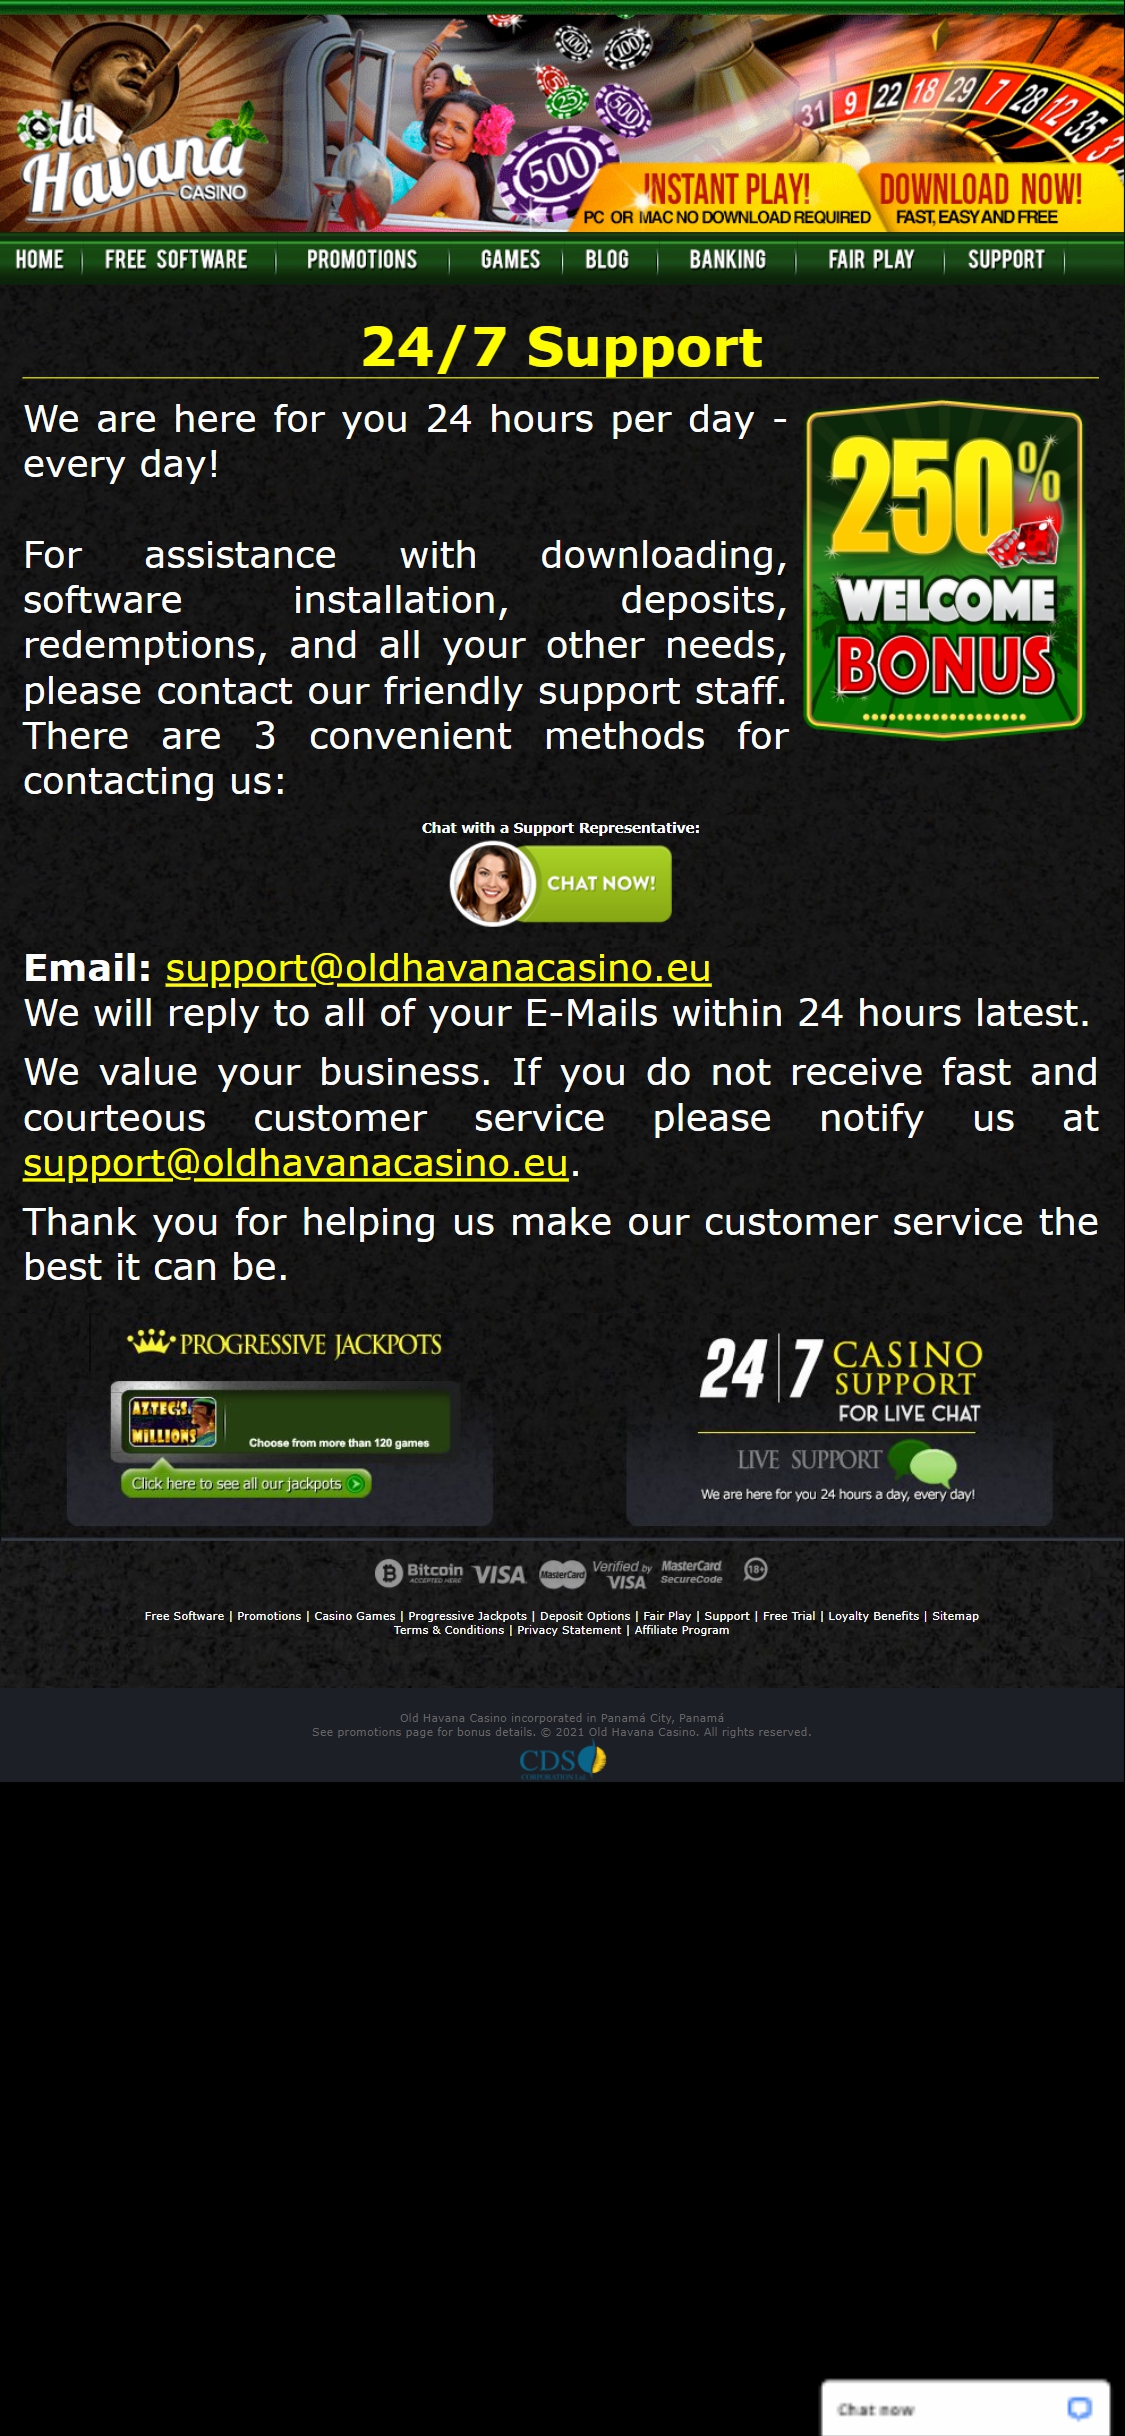 Old Havana Casino Mobile Support Review